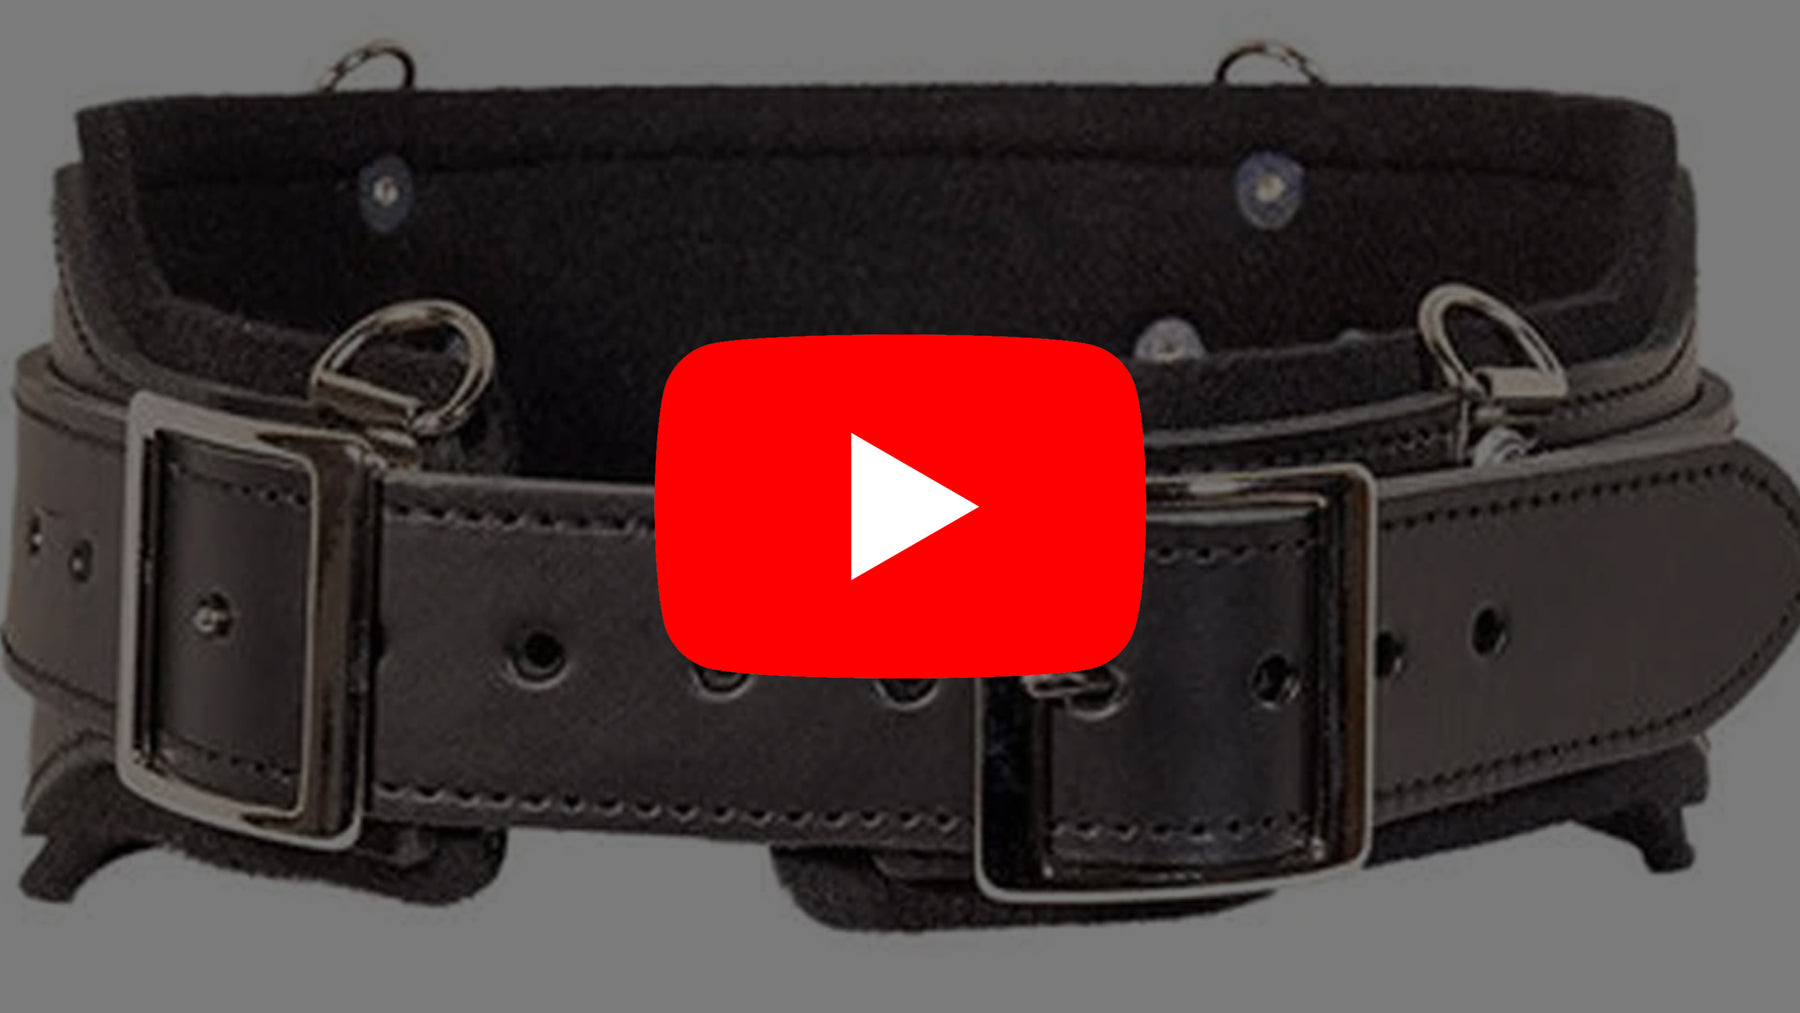 New YouTube Video - Occidental Leather 5135 Comfort Belt Overview - TF Tools Ltd